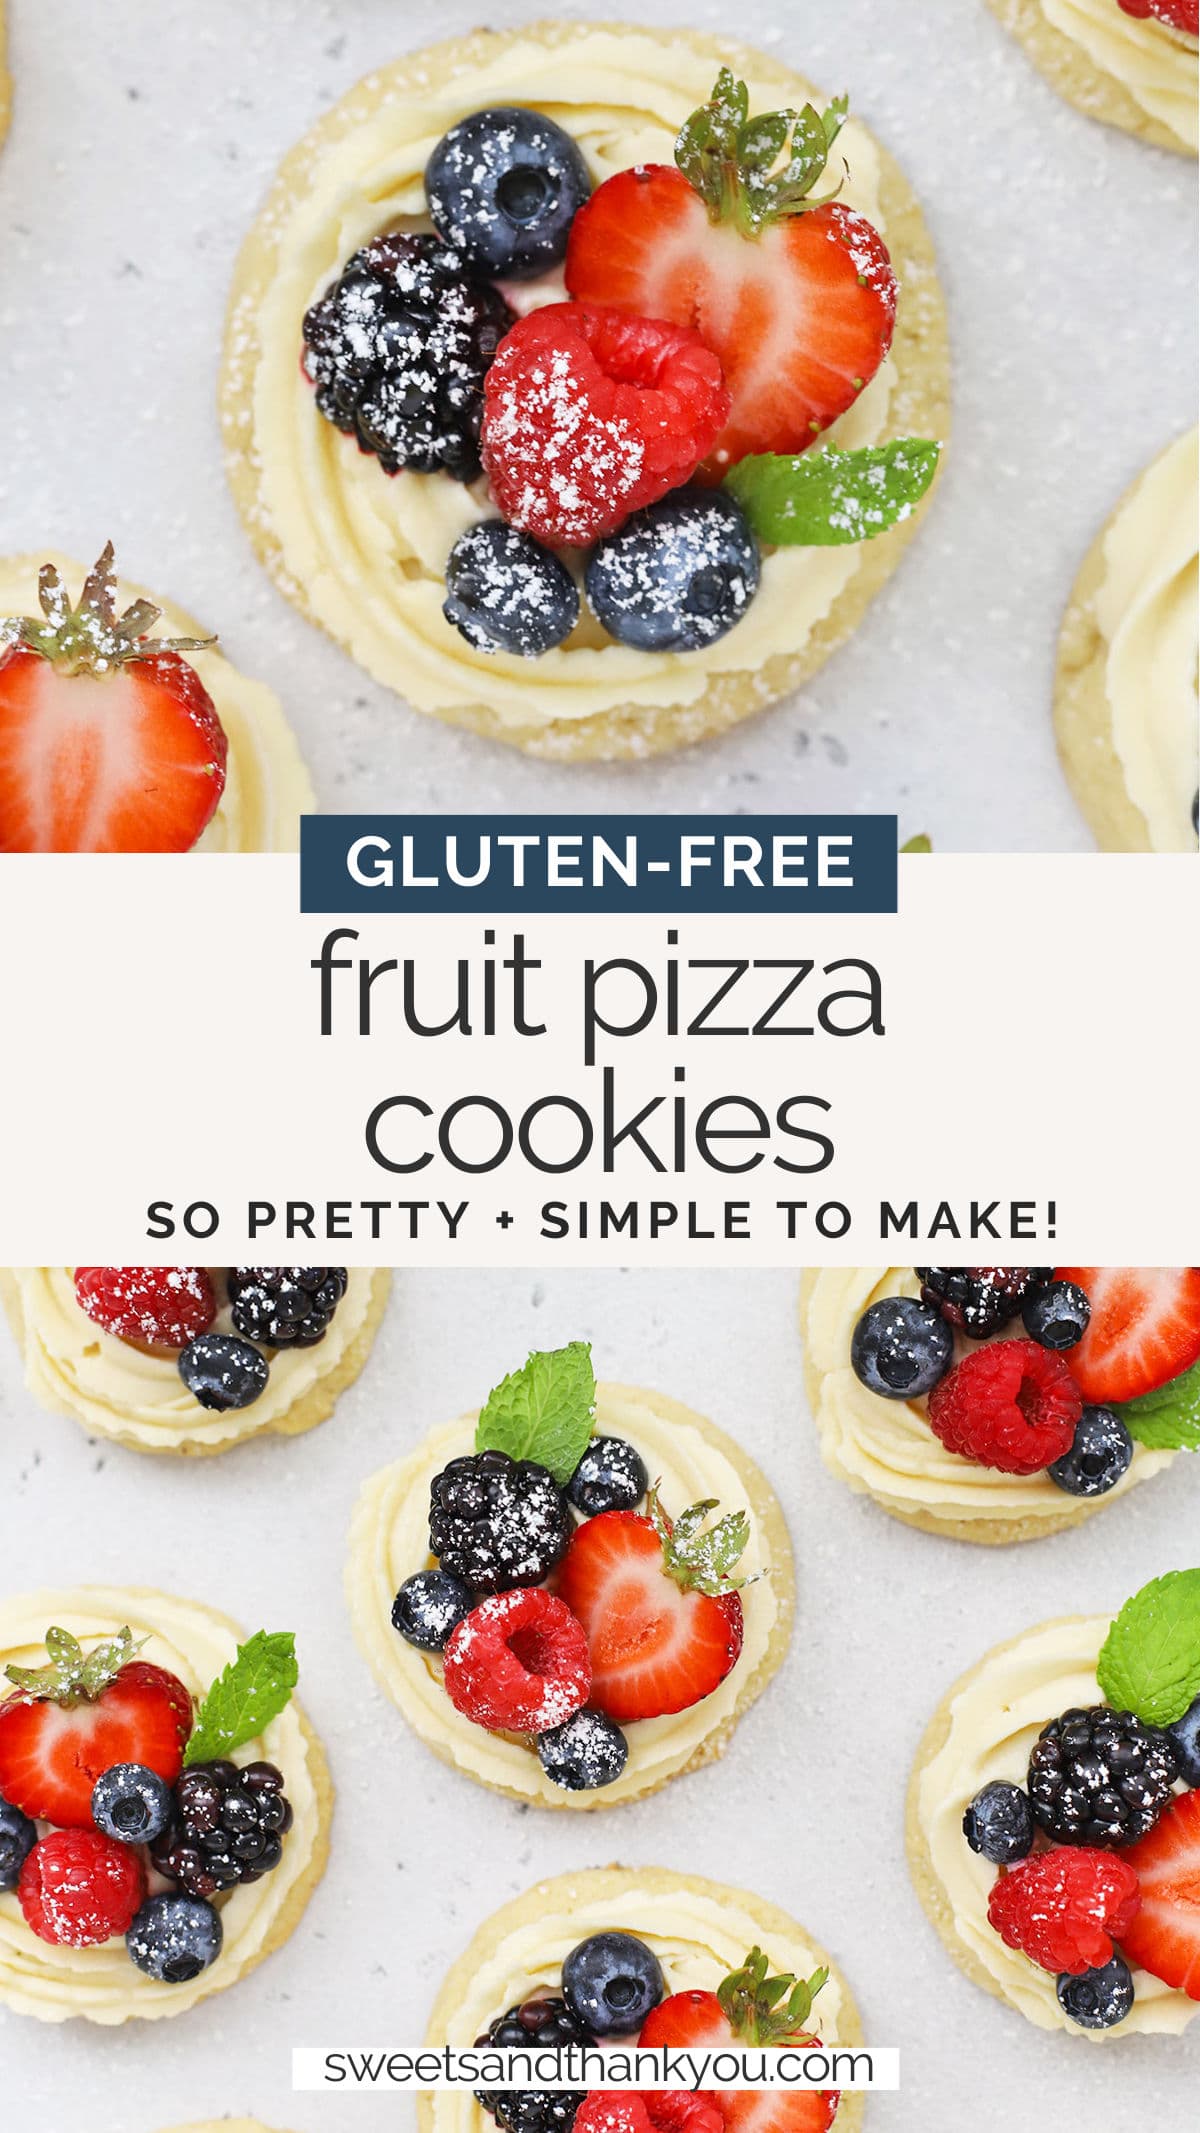 Mini Fruit Pizza Cookies - These mini gluten-free fruit pizzas are made from gluten-Free lemon sugar cookies, a light cream cheese frosting, and fresh berries. They're beautiful and easy! // Gluten-Free Fruit Pizza // Mini Fruit Pizzas // Fruit pizza cookie recipe // Gluten Free lemon cookies 